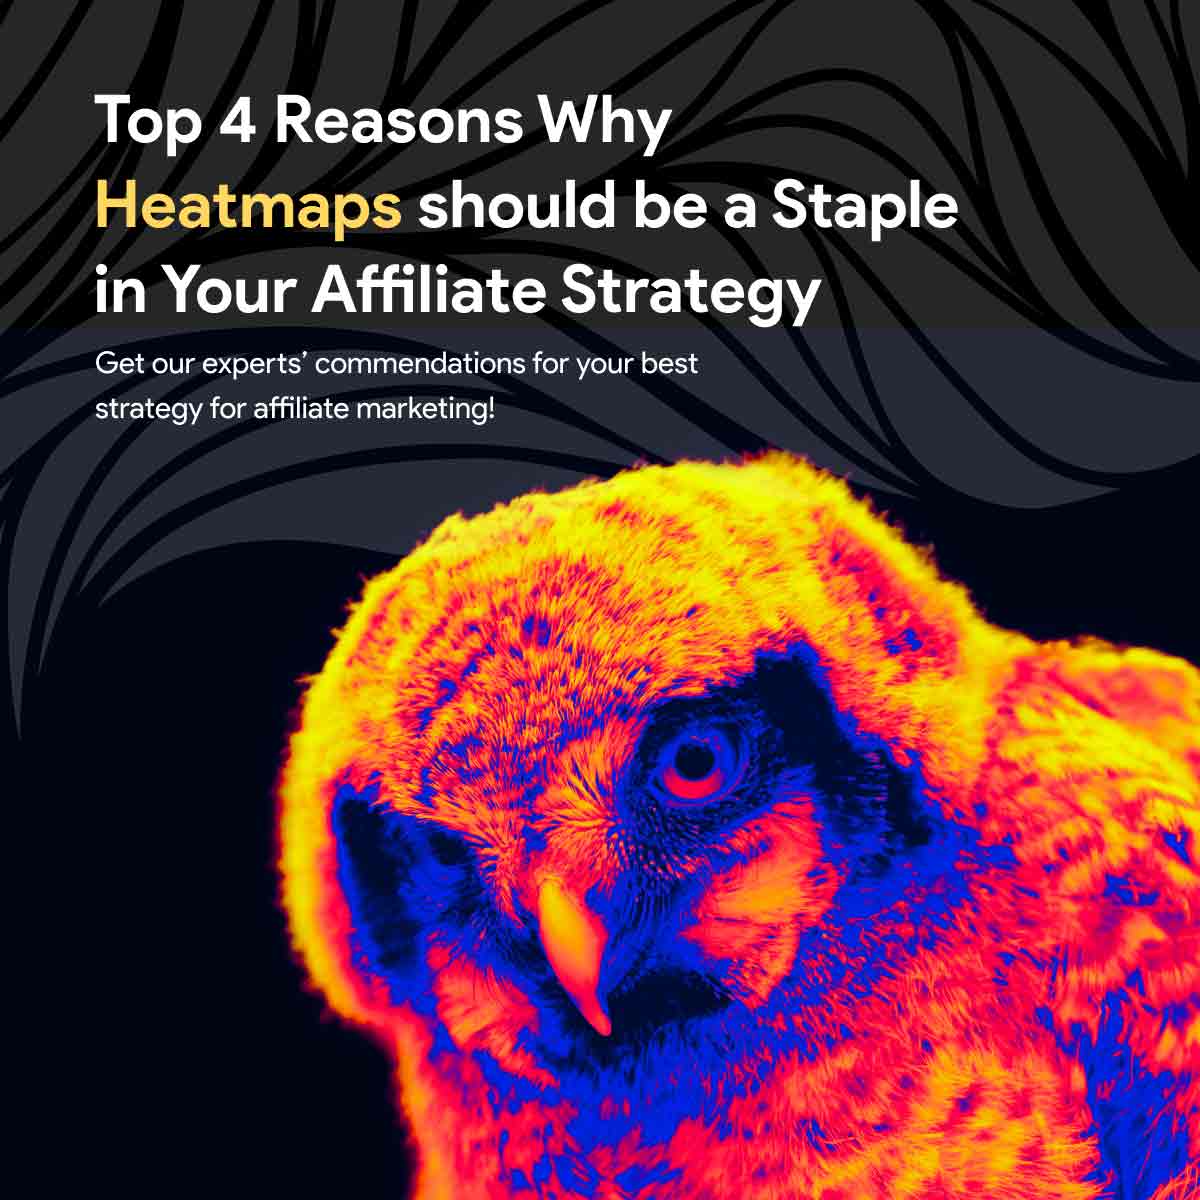 eBook - Why Heat Maps are a Staple in Affiliate Marketing